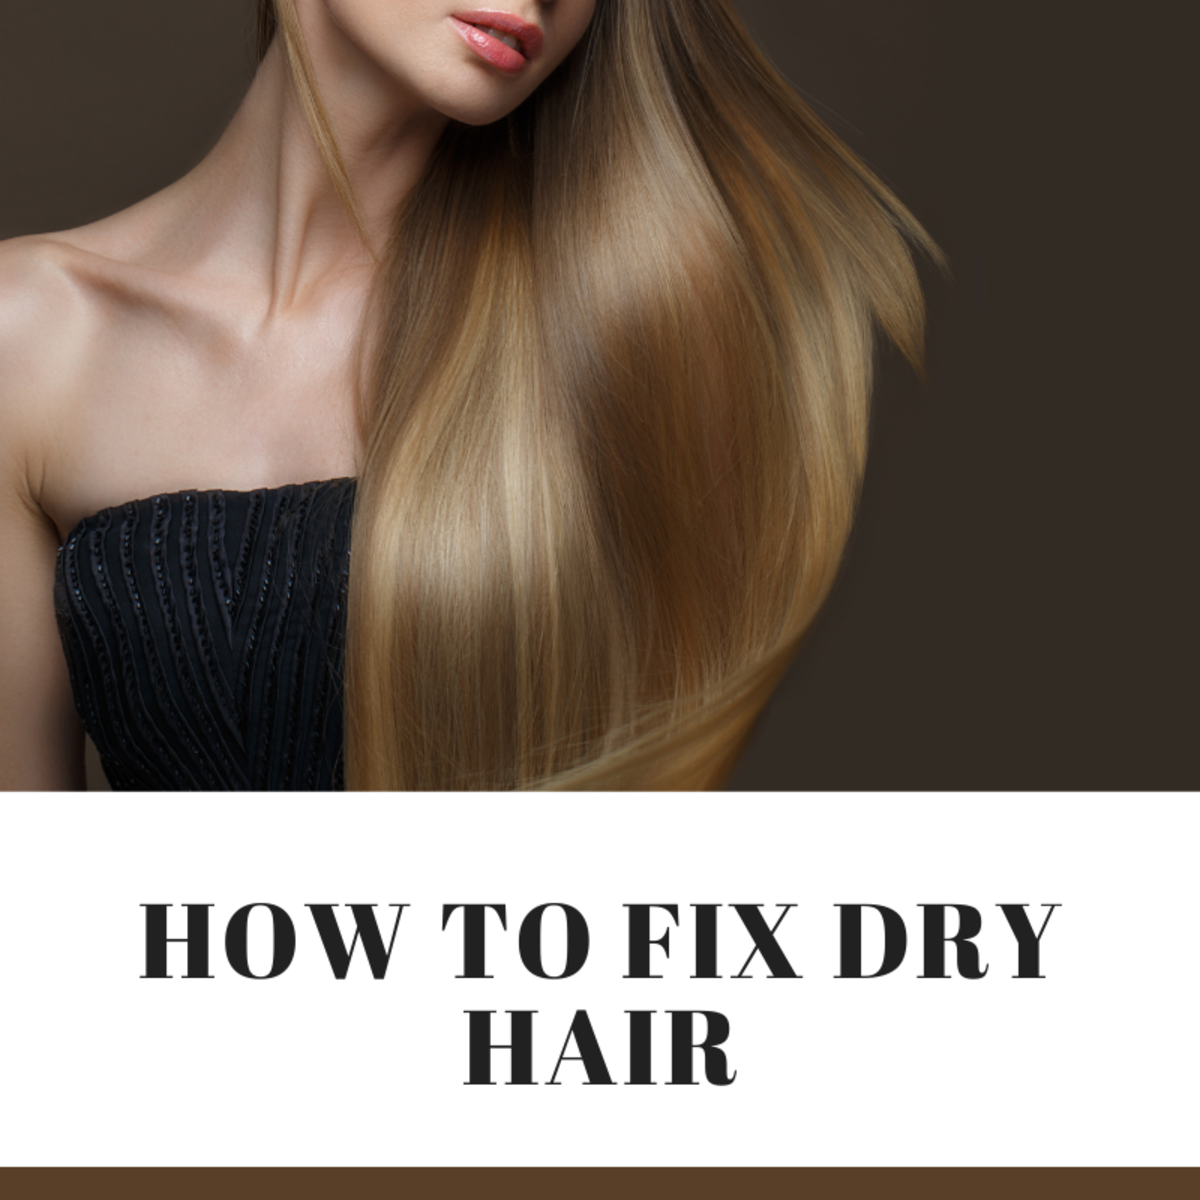 How to Fix Dry Hair